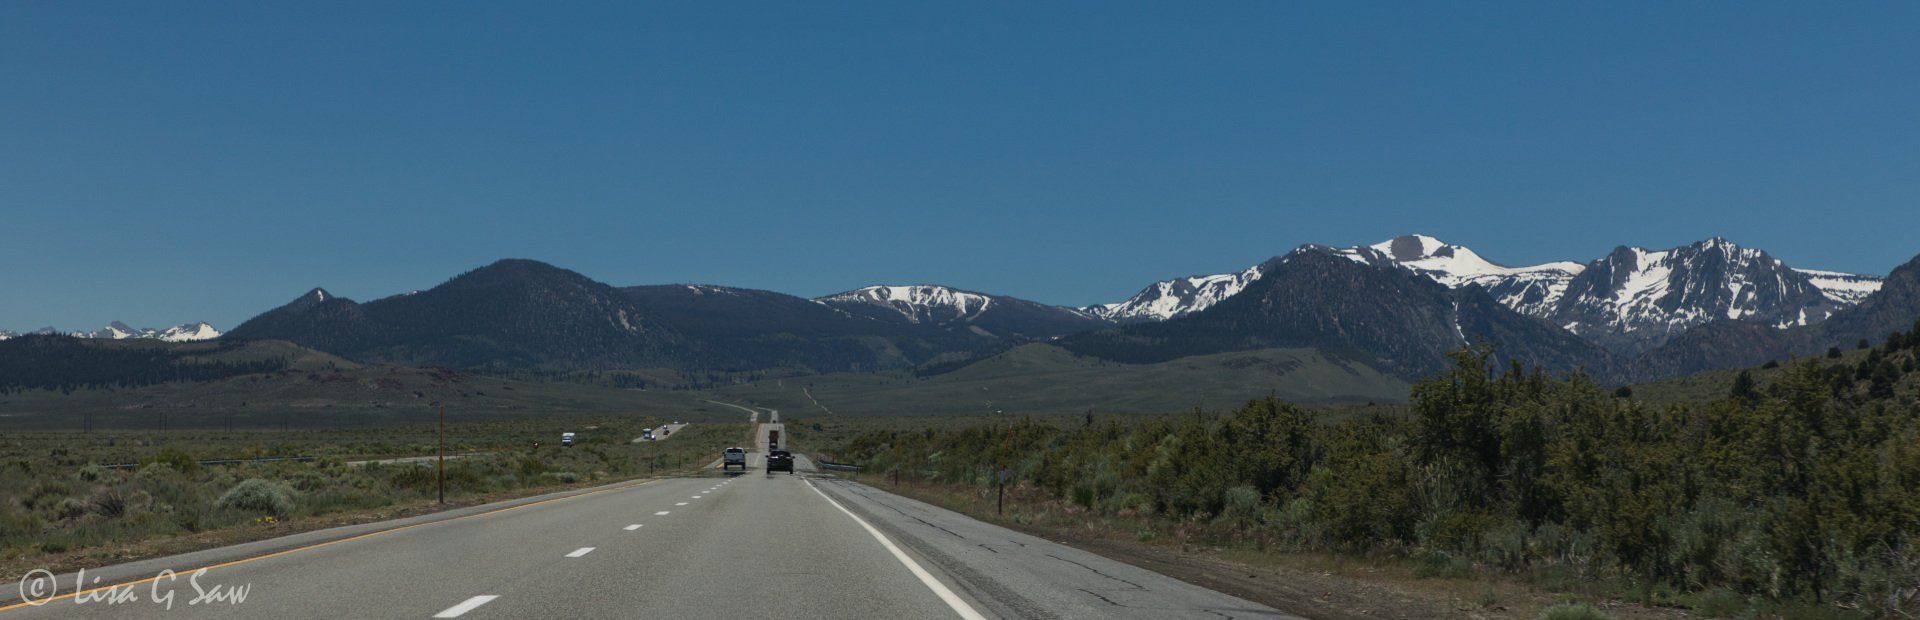 Long straight road towards snow capped mountains